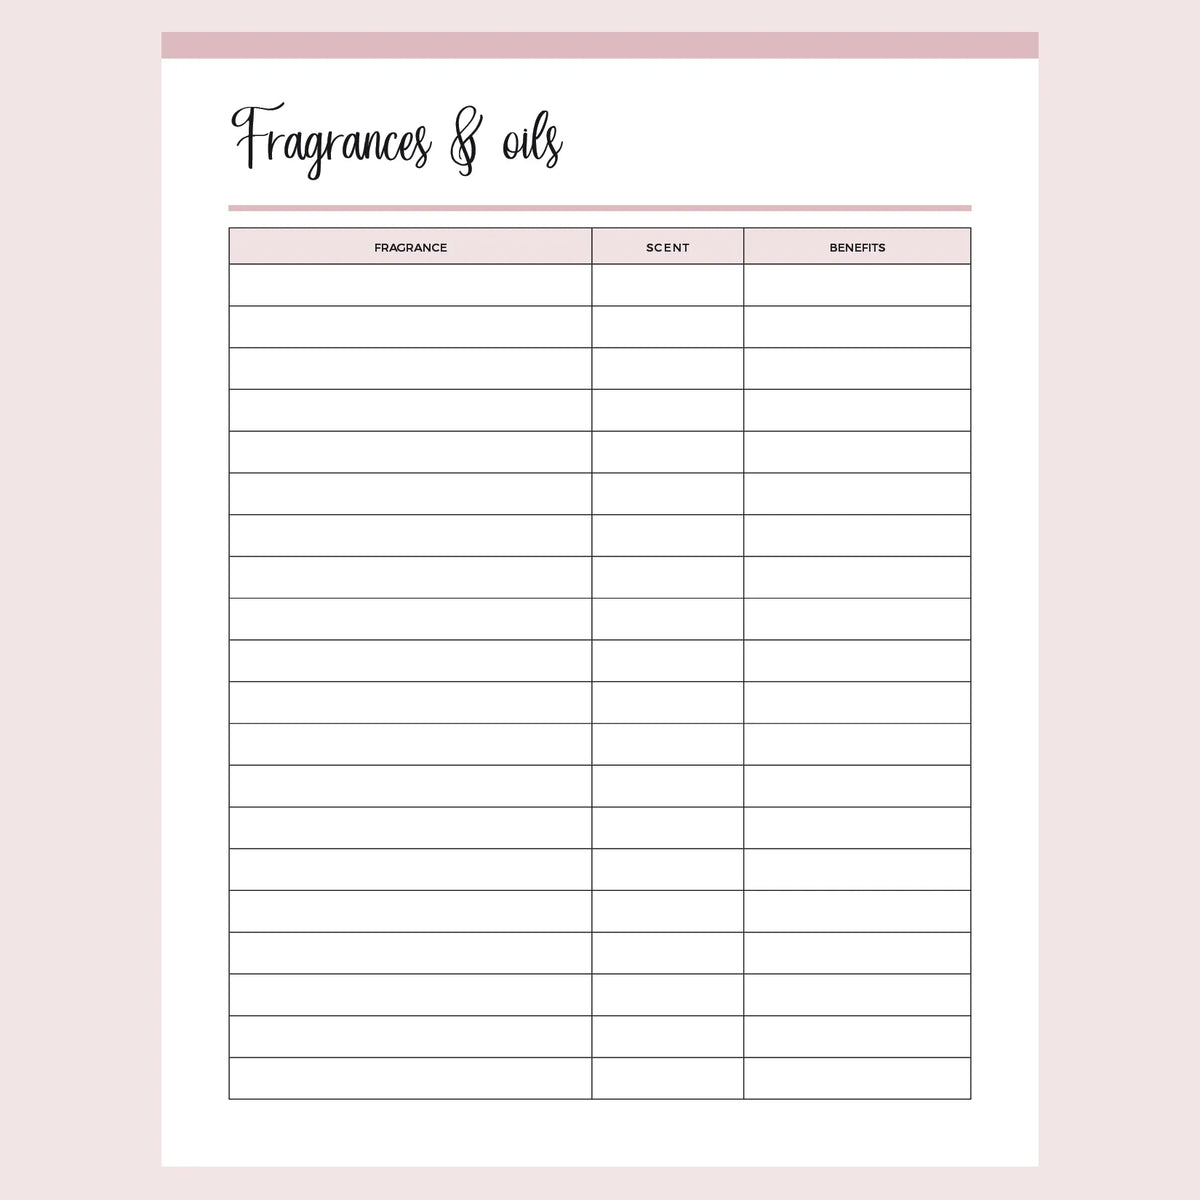 Printable Fragrance and Oil Tracking Sheet, DIY Candle Maker, Soap Making,  Scents List Essential Oil List, A4, Letter Size, Print at Home 